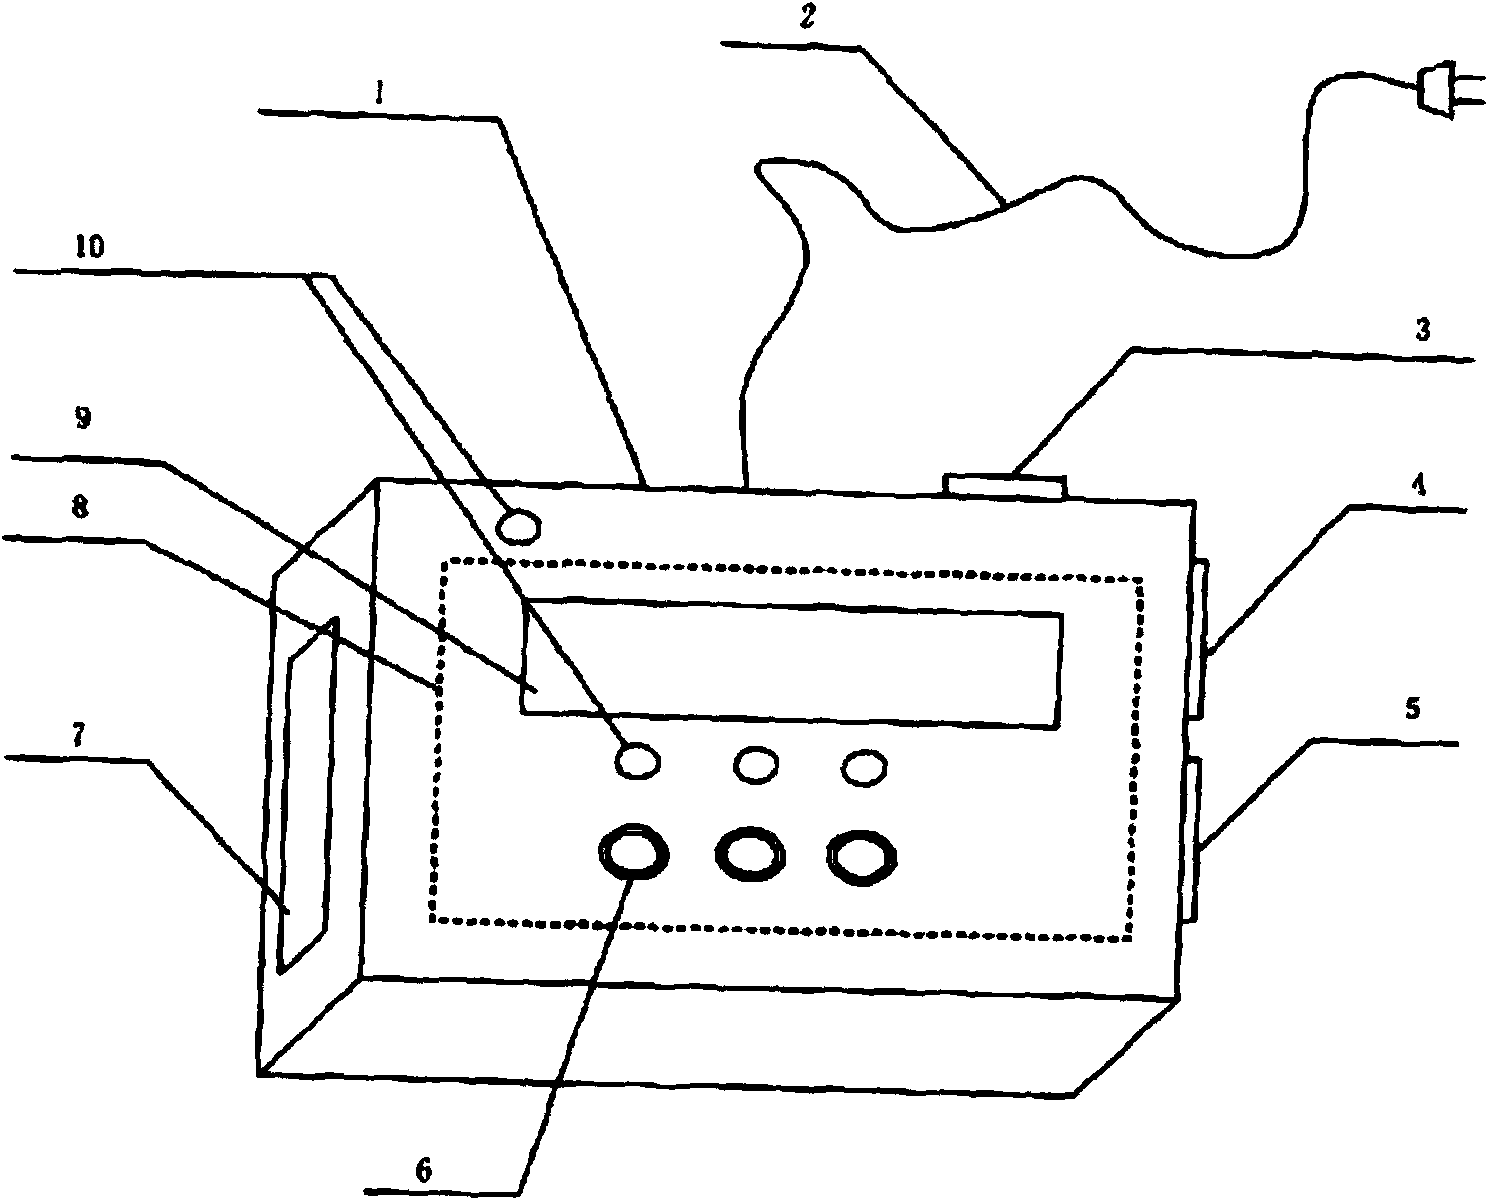 Signal reproduction type integrated circuit board failure detection device